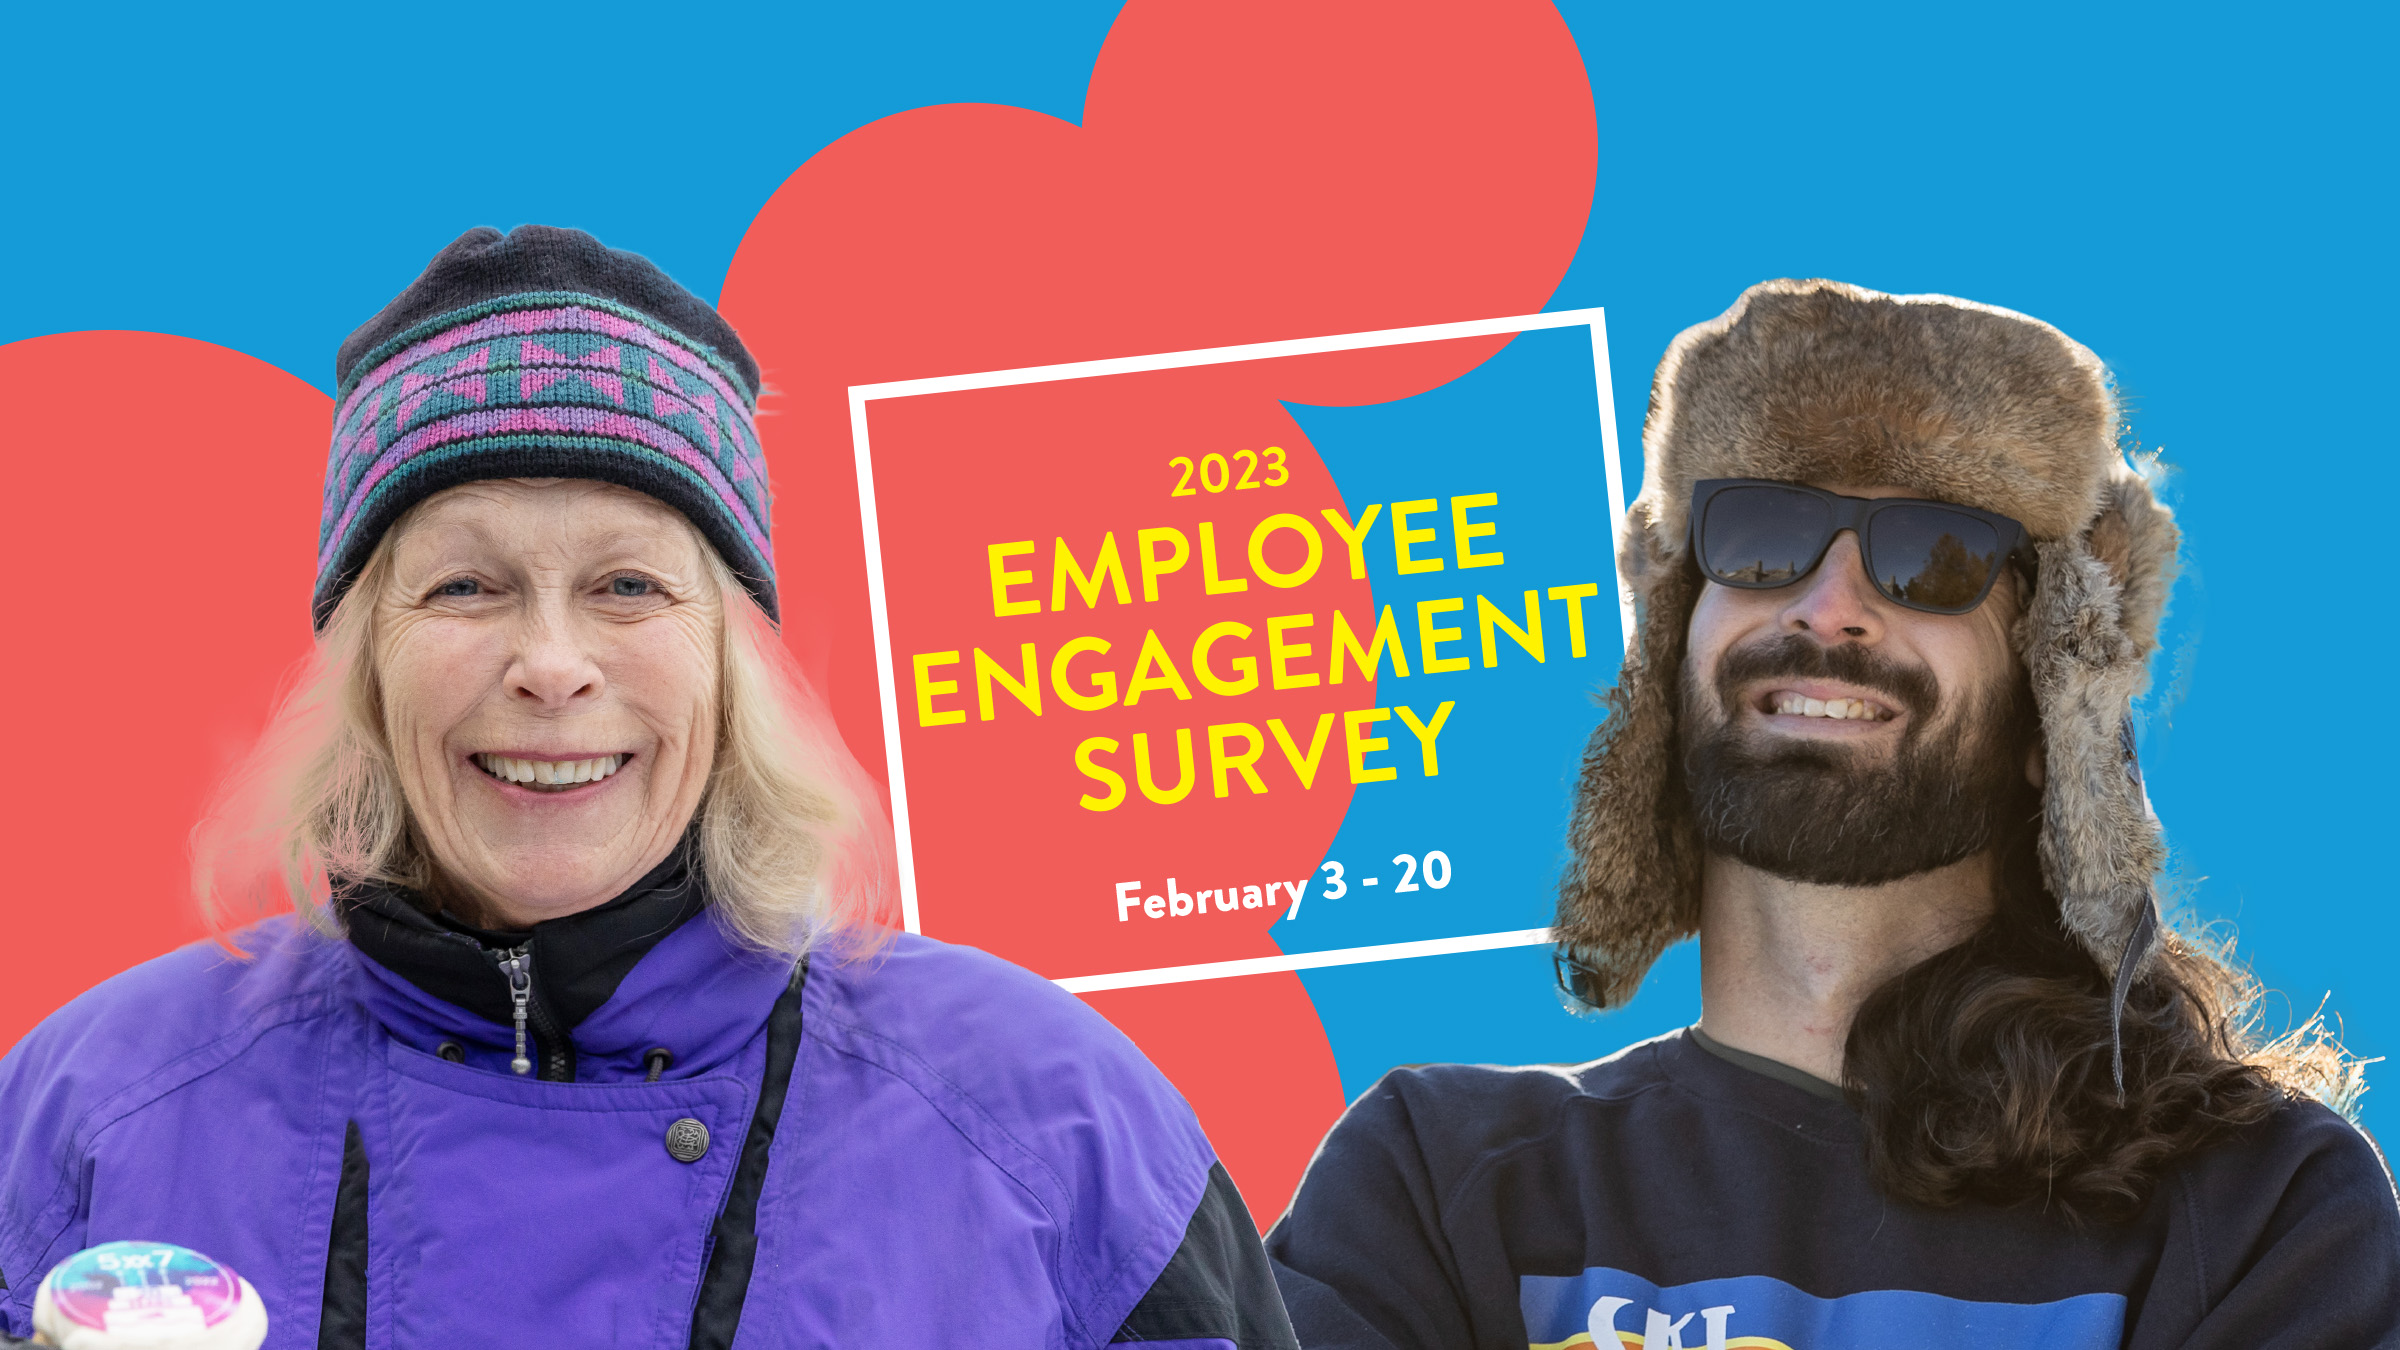 Employees who work at Blue Mountain with 2023 Employee Engagement Survey